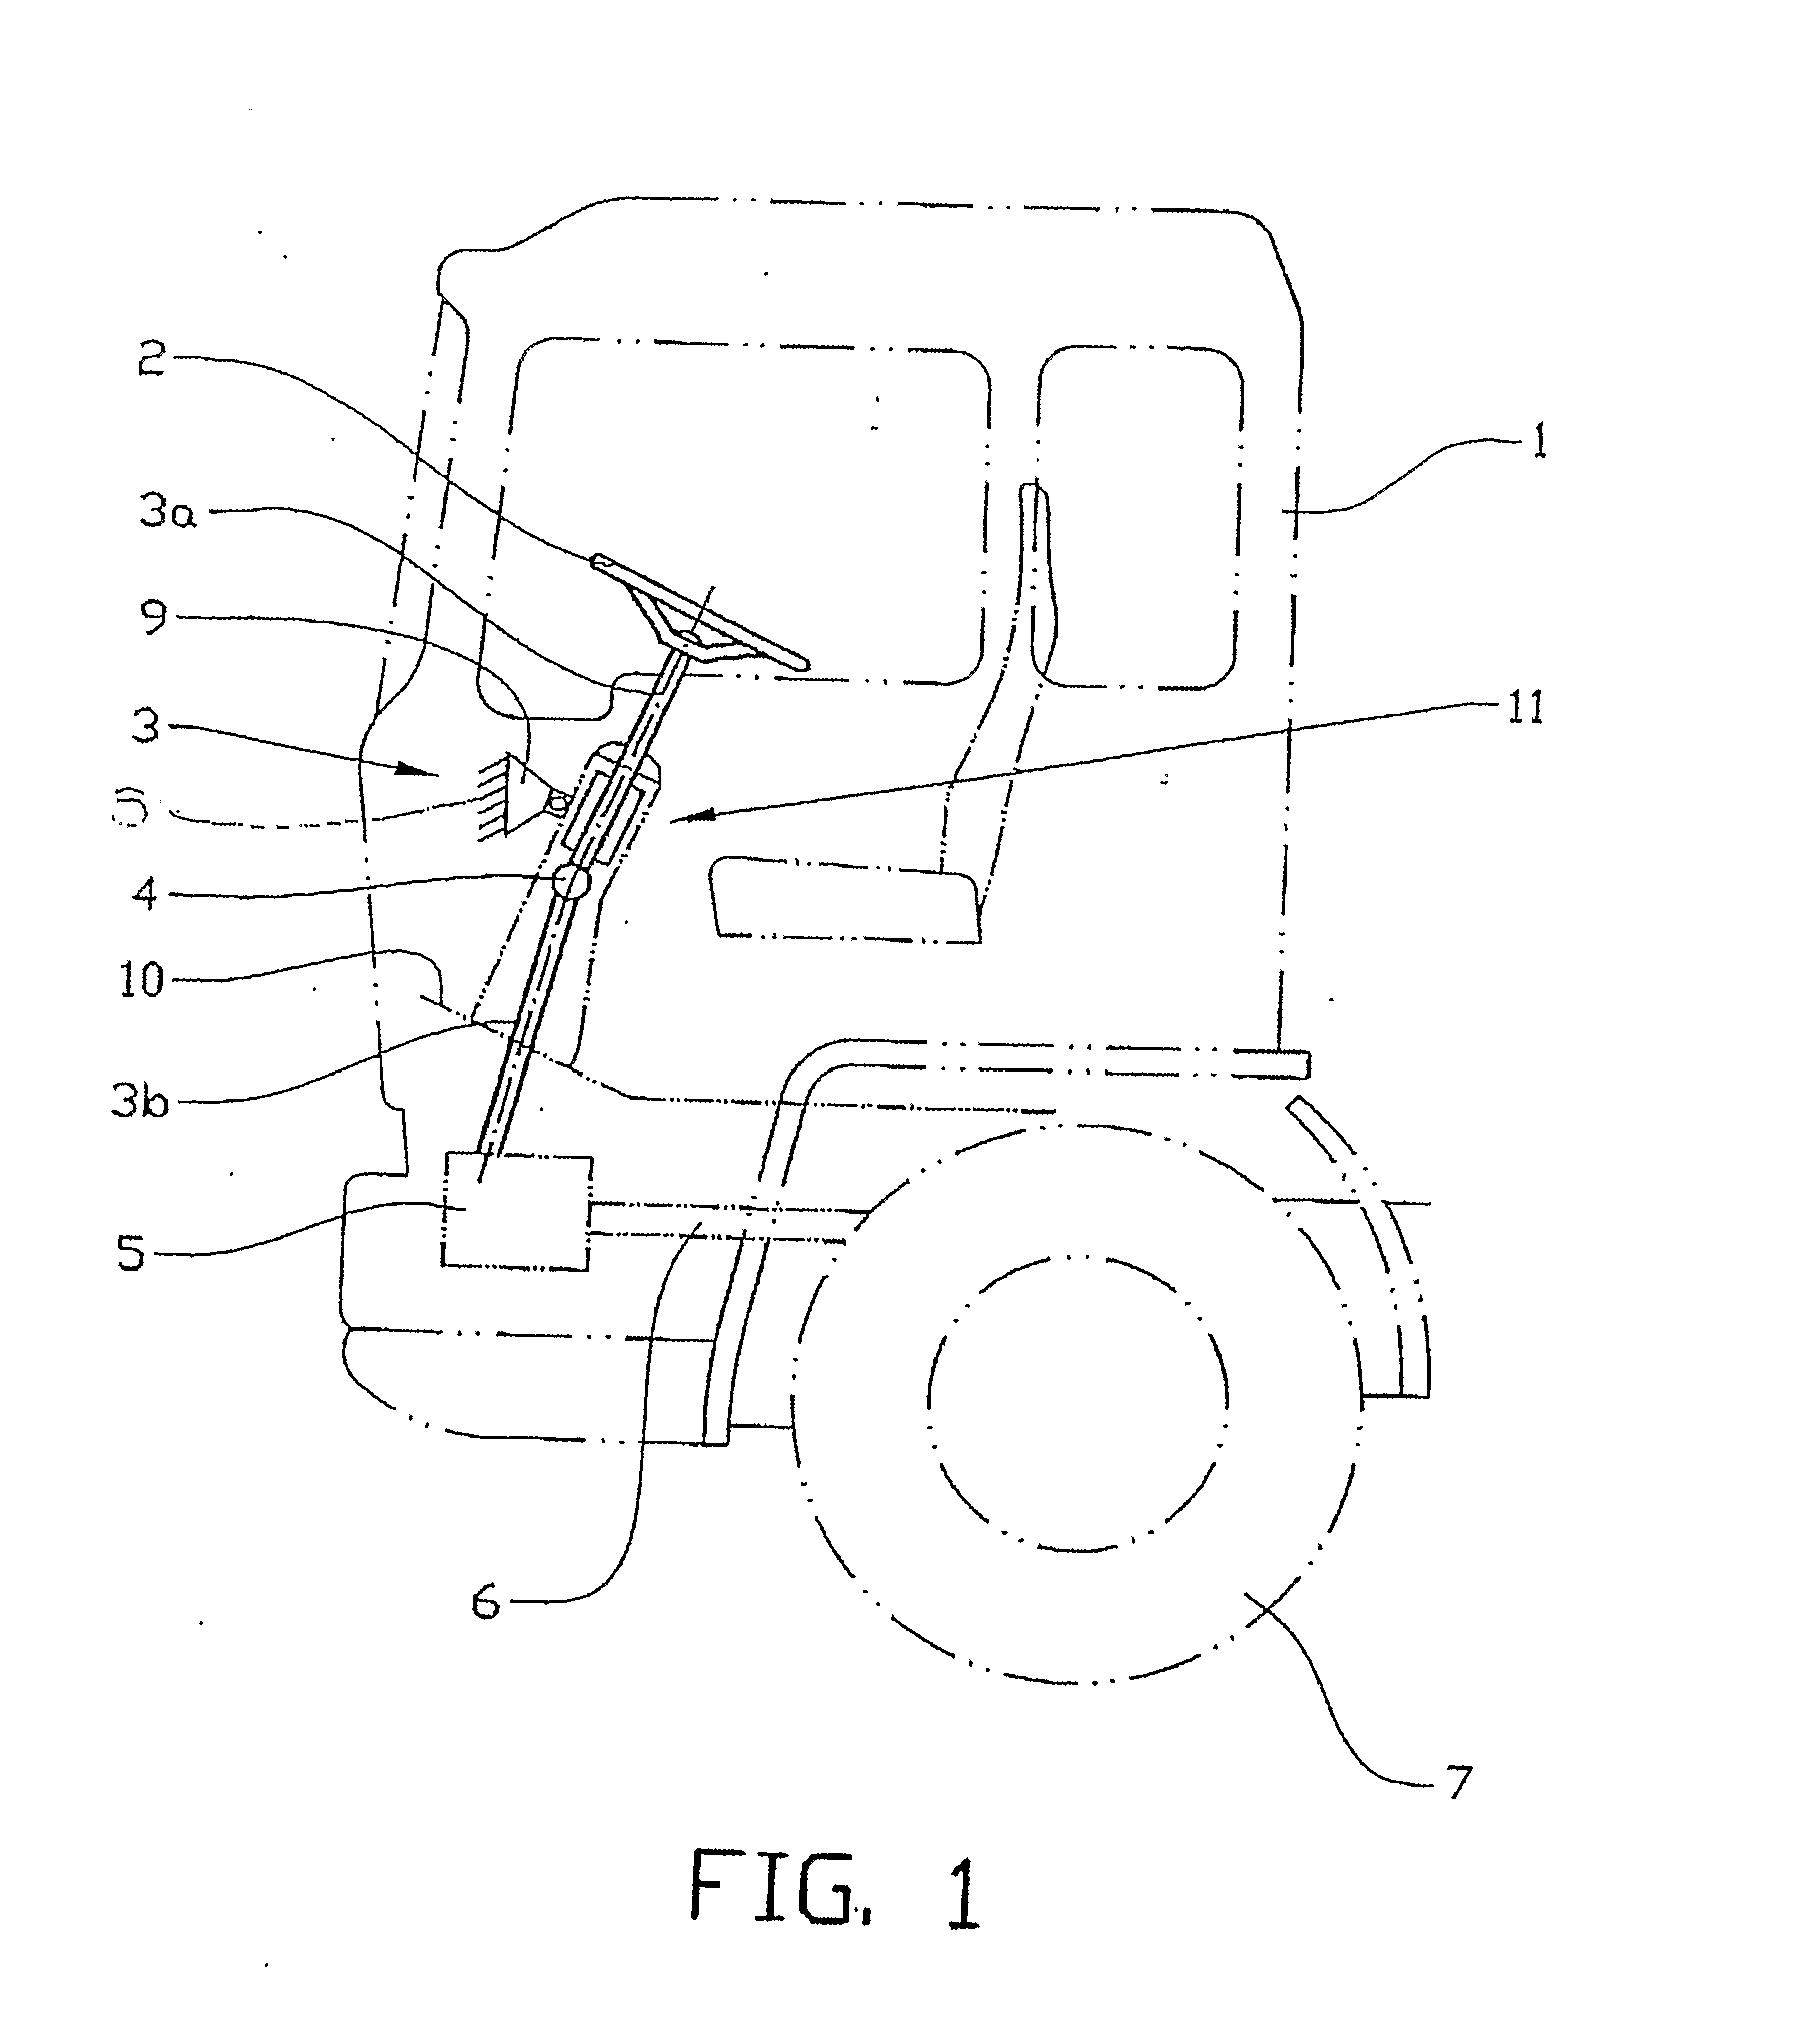 Arrangement for vibration damping in a steering column